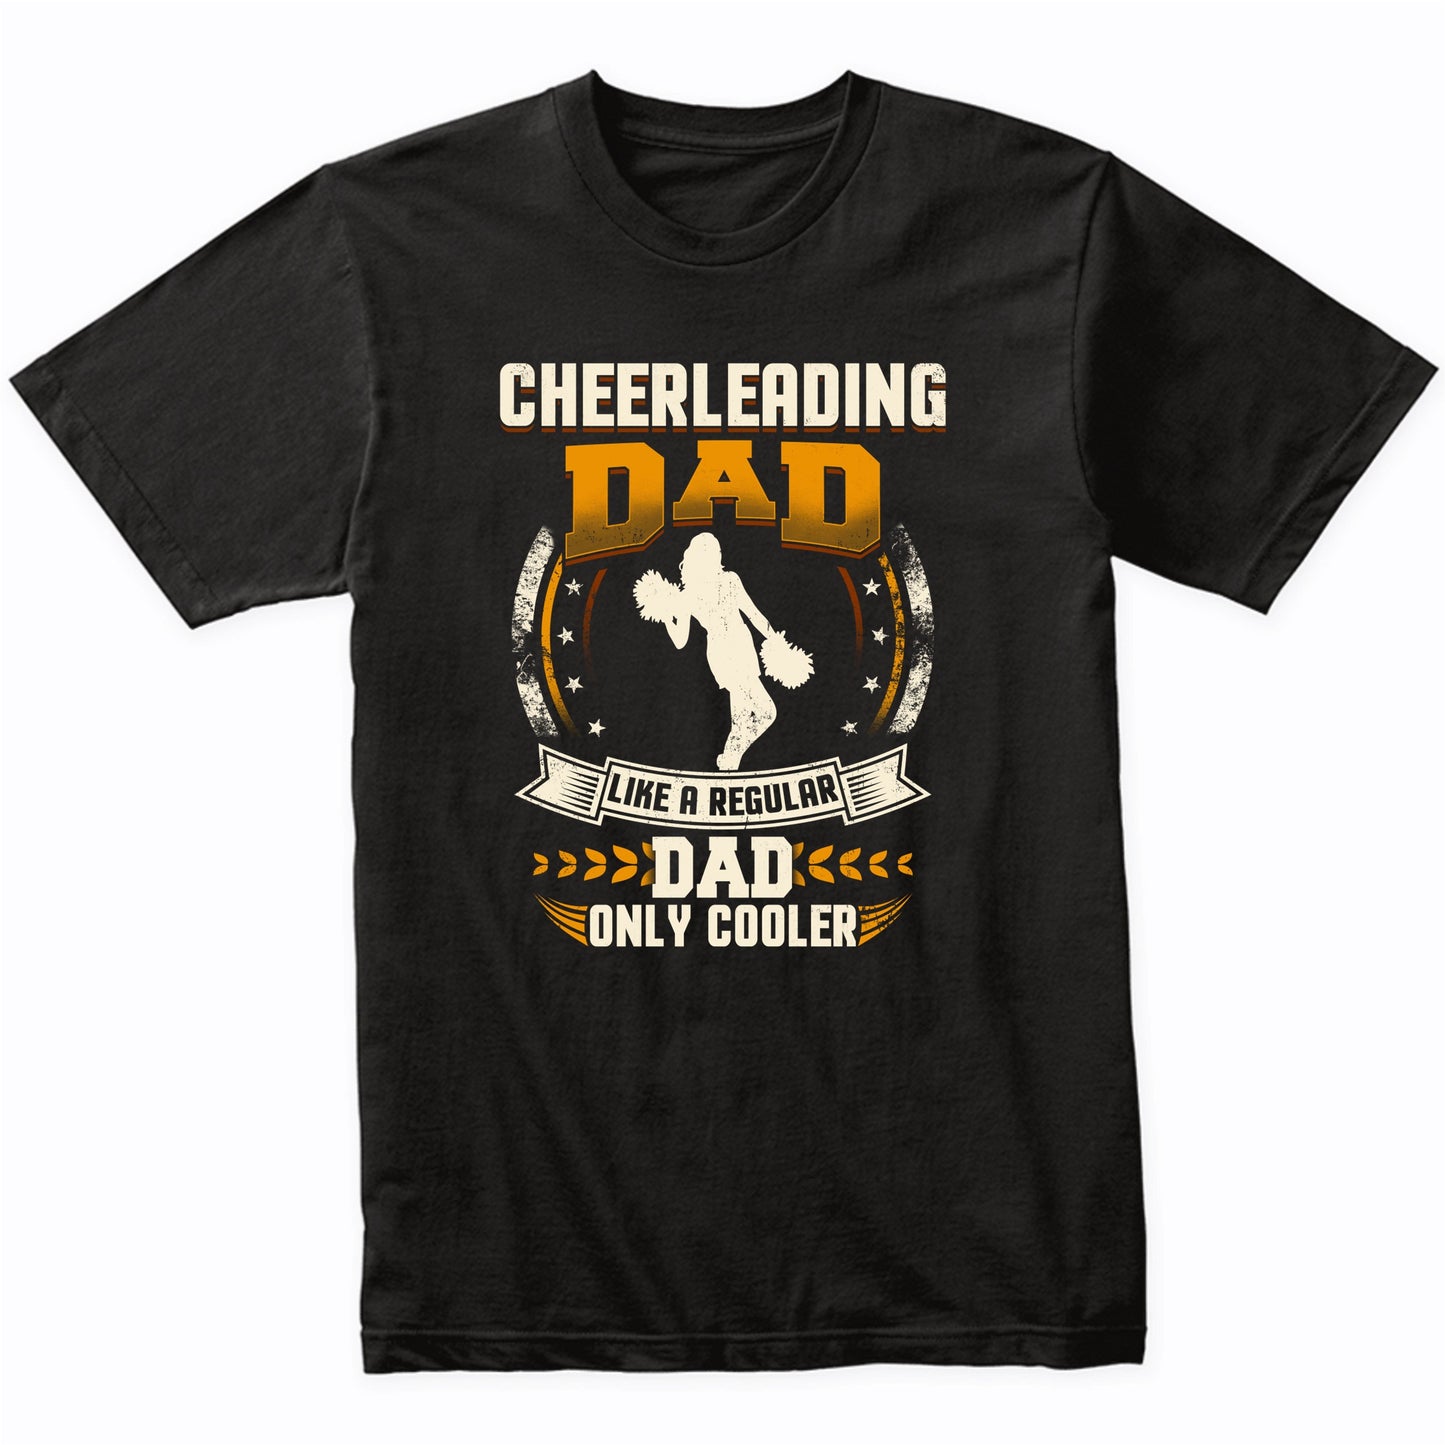 Cheerleading Dad Like A Regular Dad Only Cooler Funny T-Shirt